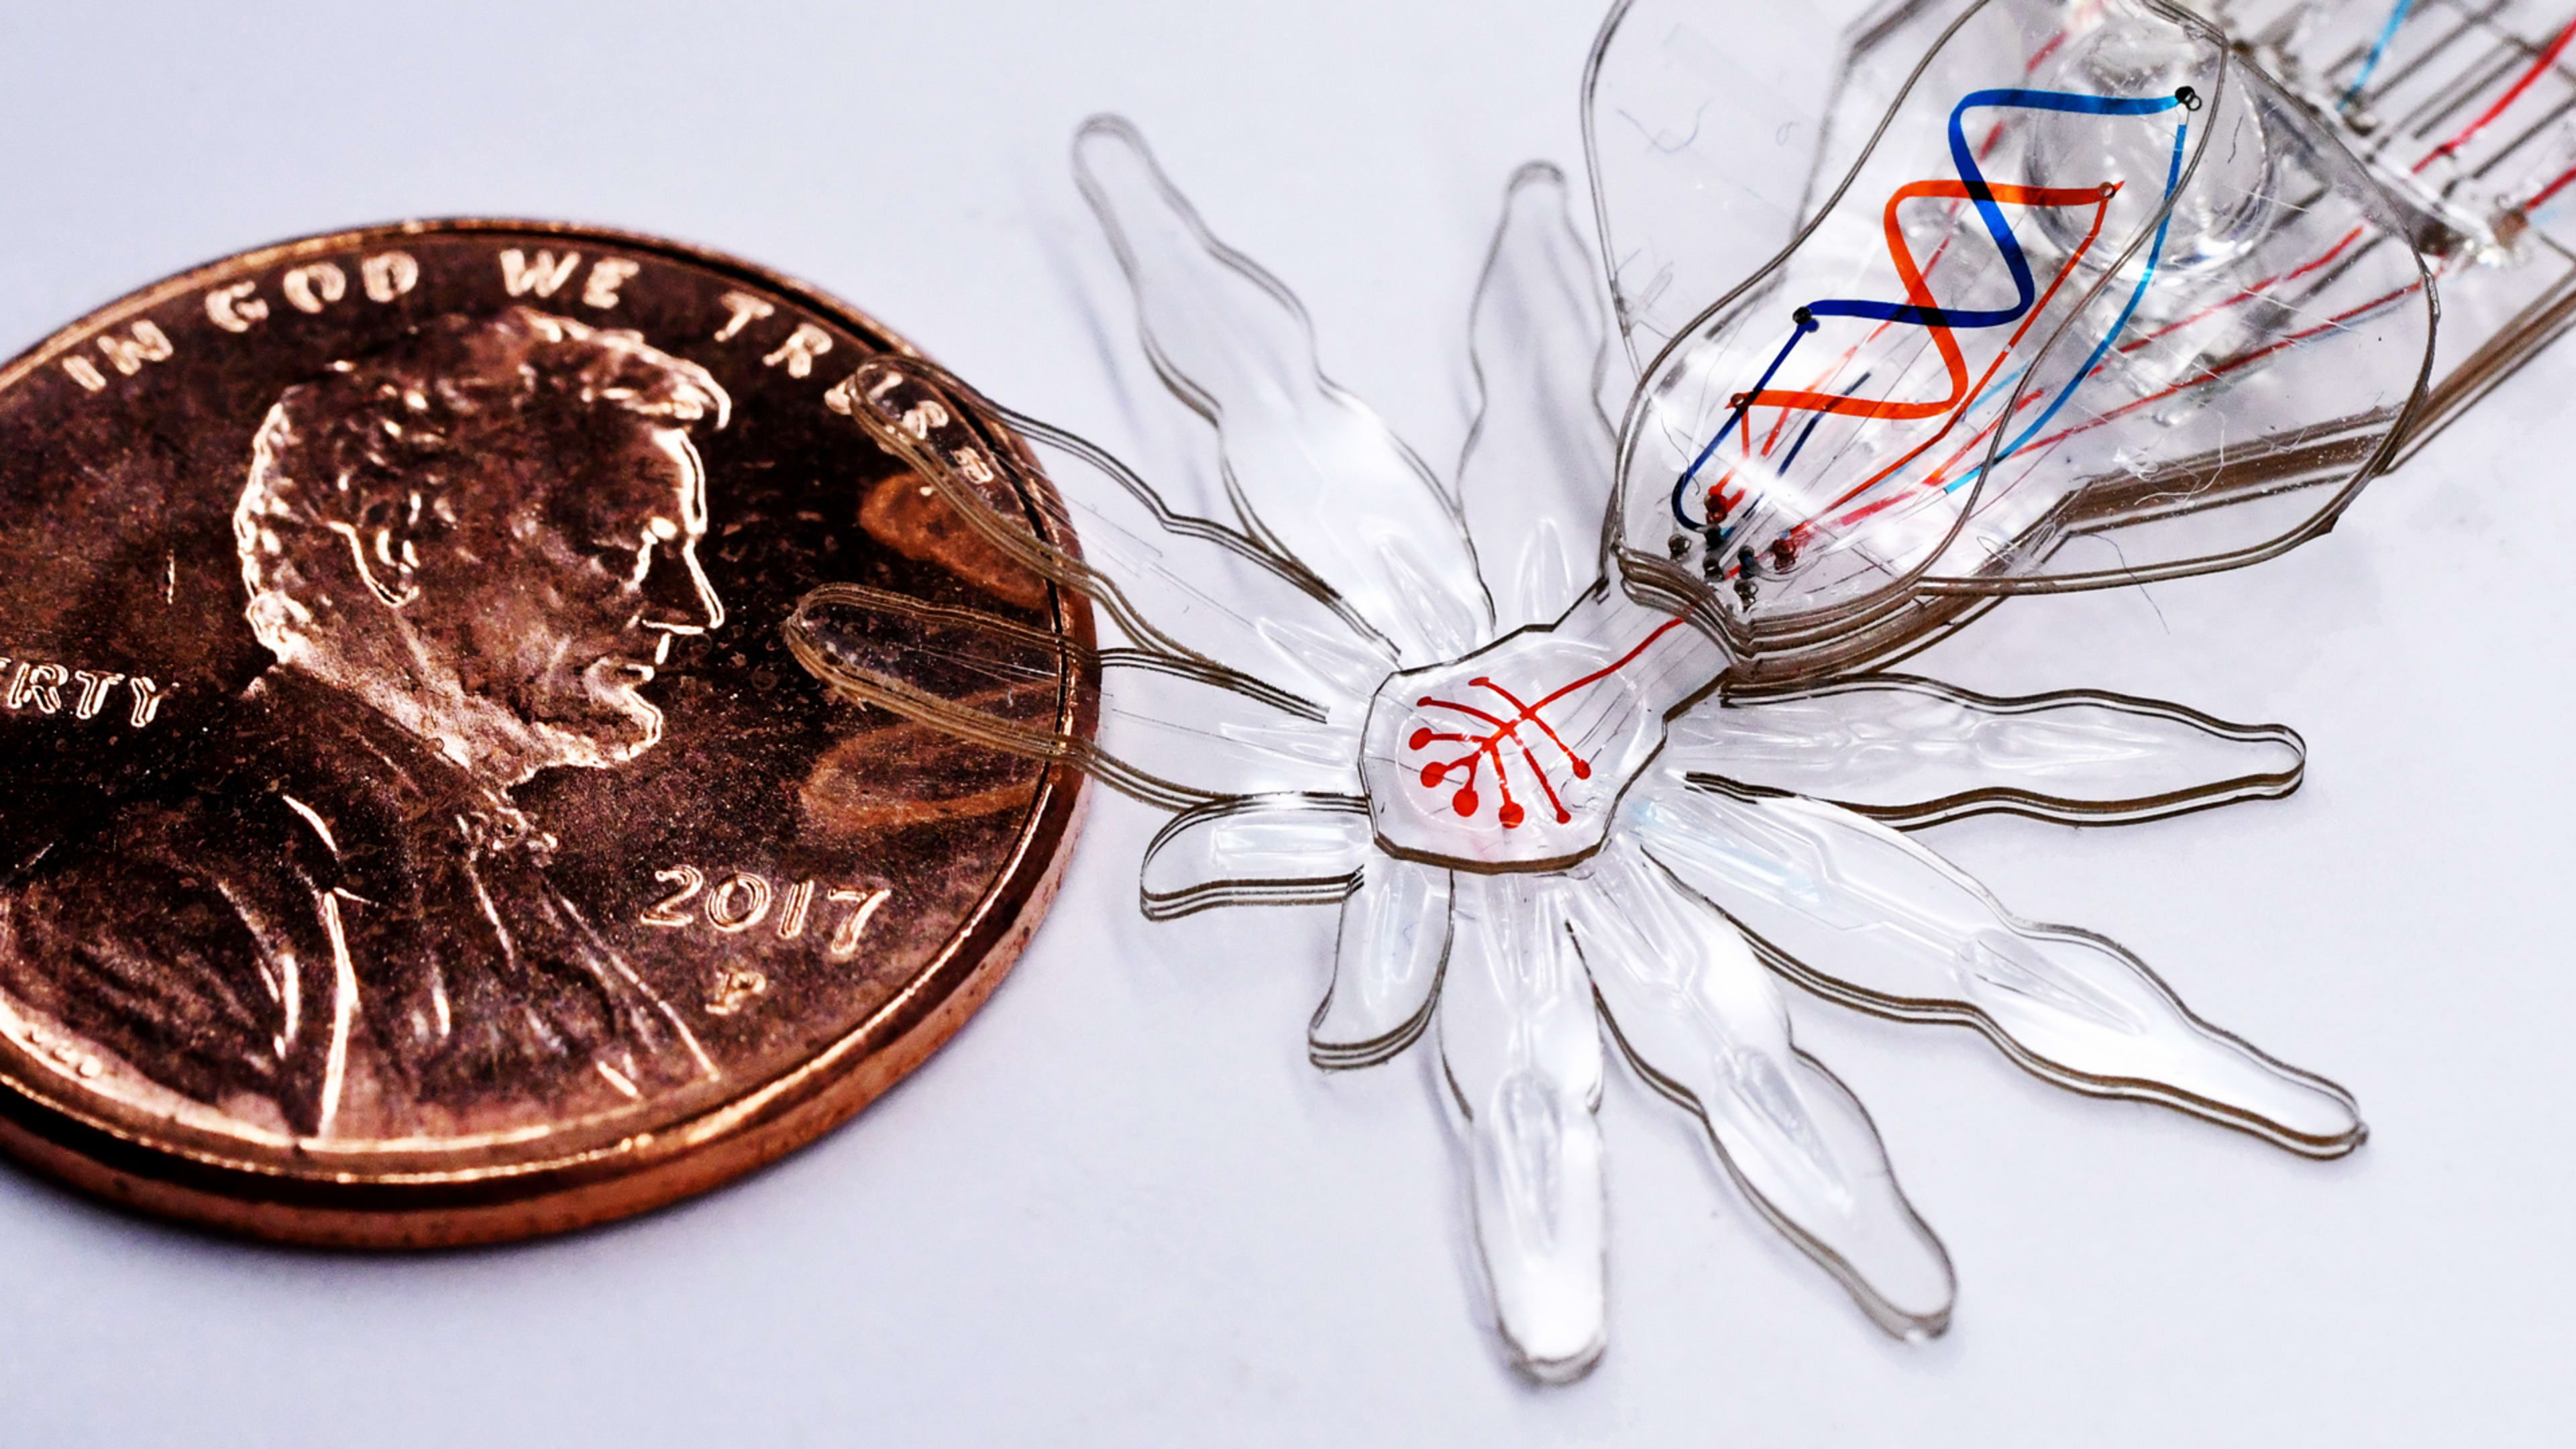 Someday this tiny spider bot could perform surgery inside your body